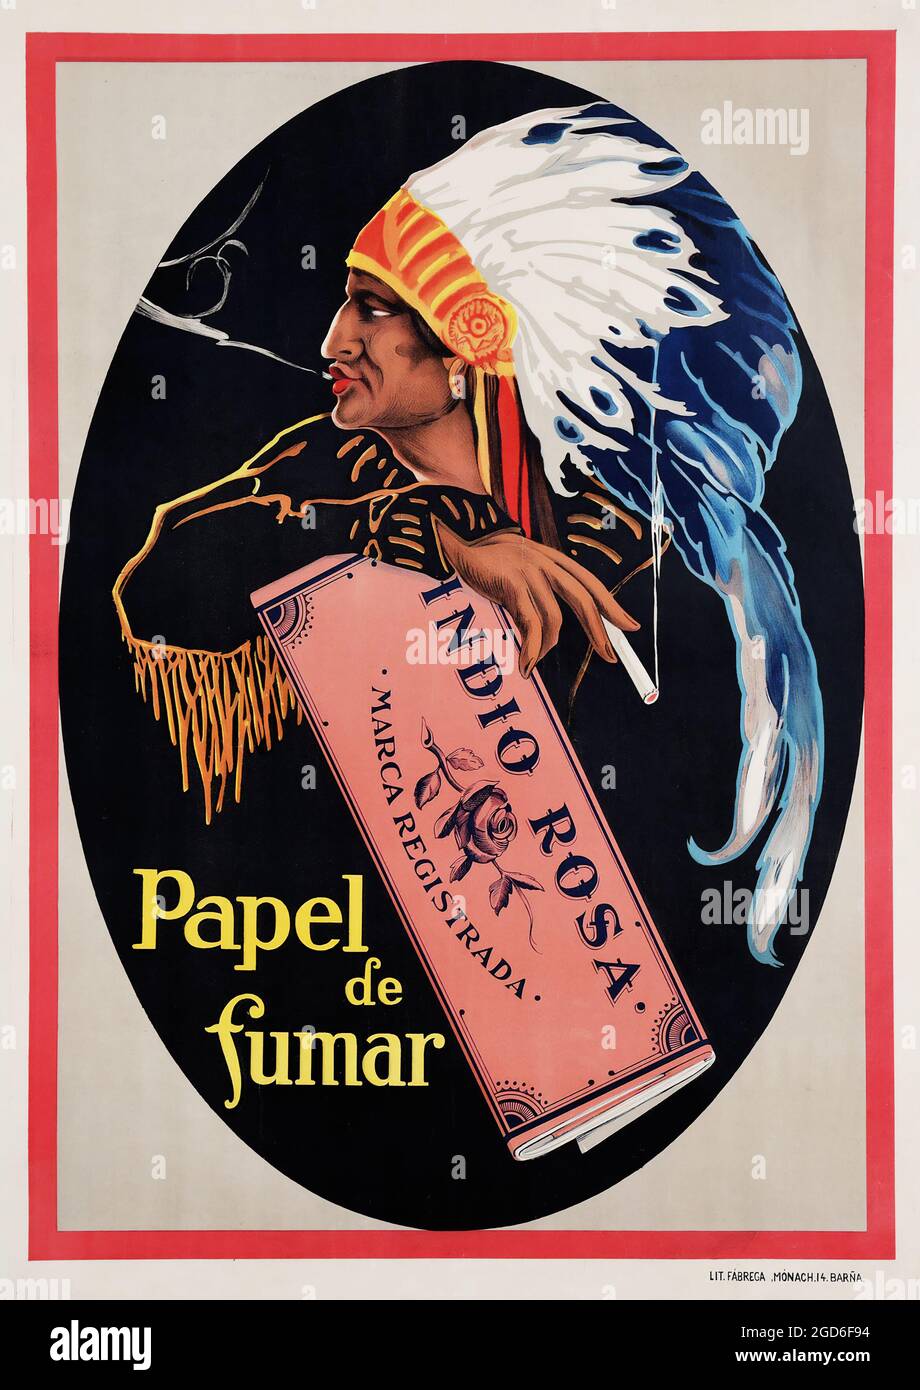 Old and vintage advertisement / poster. Unknown artist - Papel de Fumar (cigarette paper) Indio Rosa, Barcelona (Spain) - 1960s Stock Photo